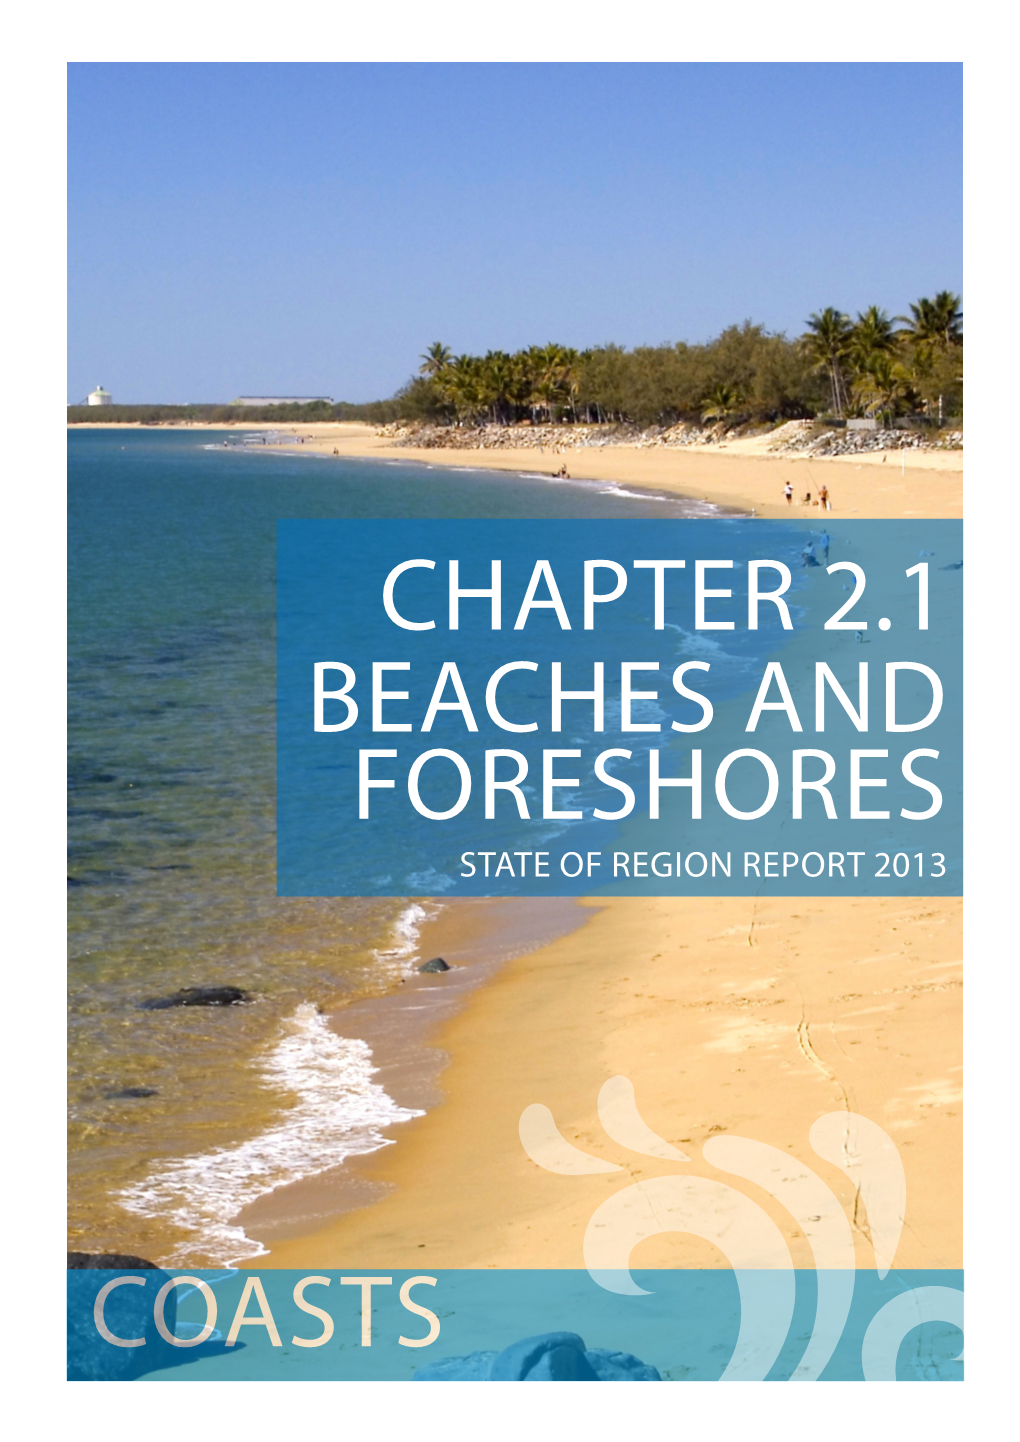 Chapter 2.1 Beaches and Foreshores Coasts